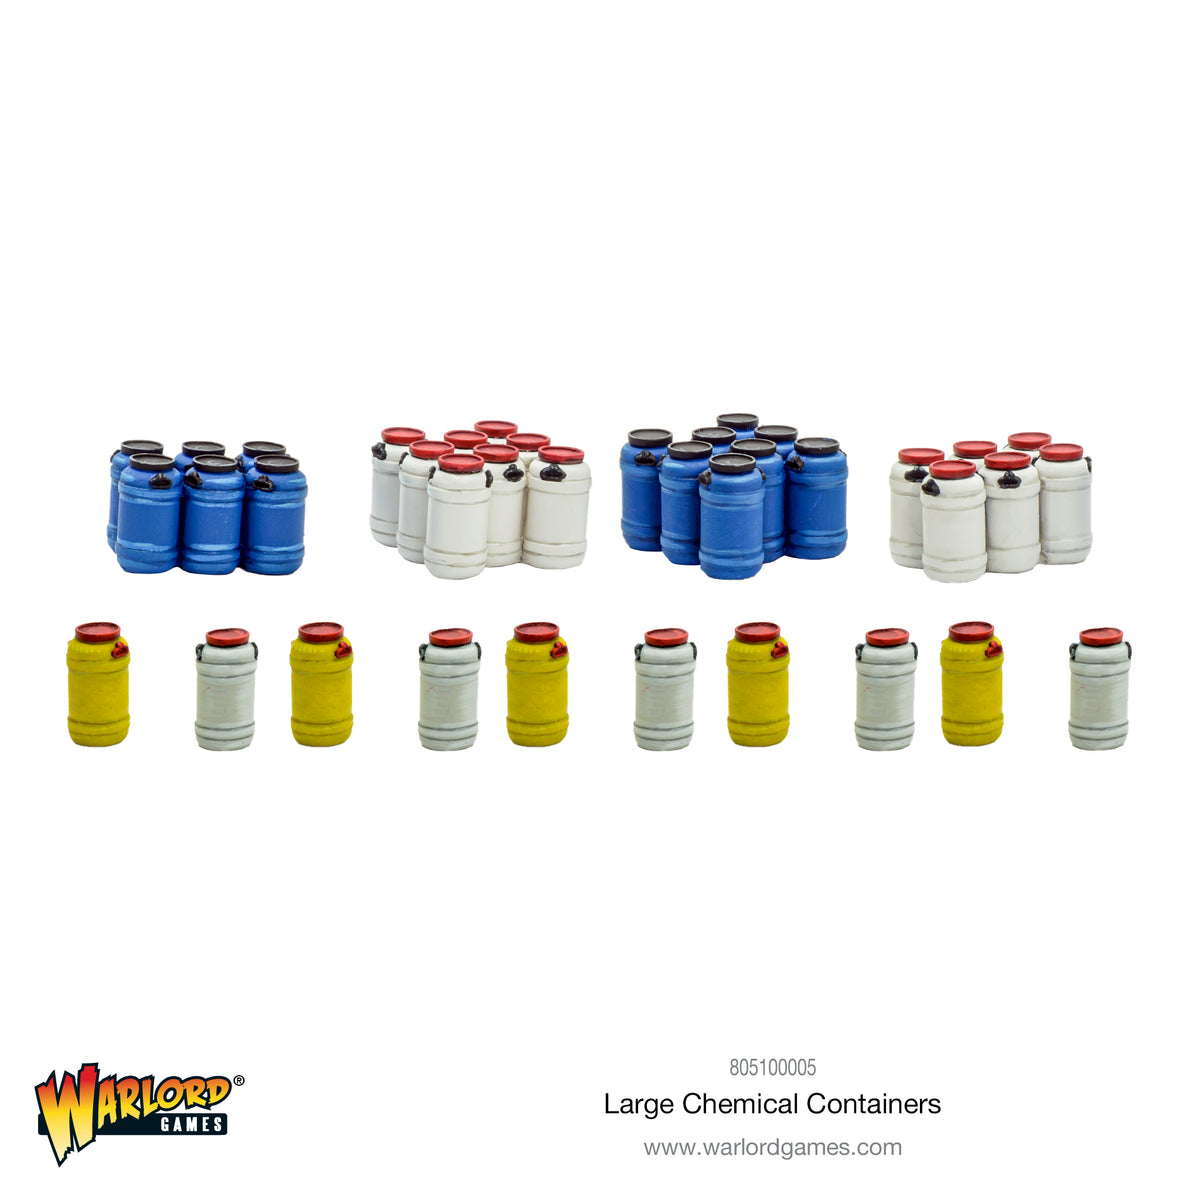 Large Chemical Containers